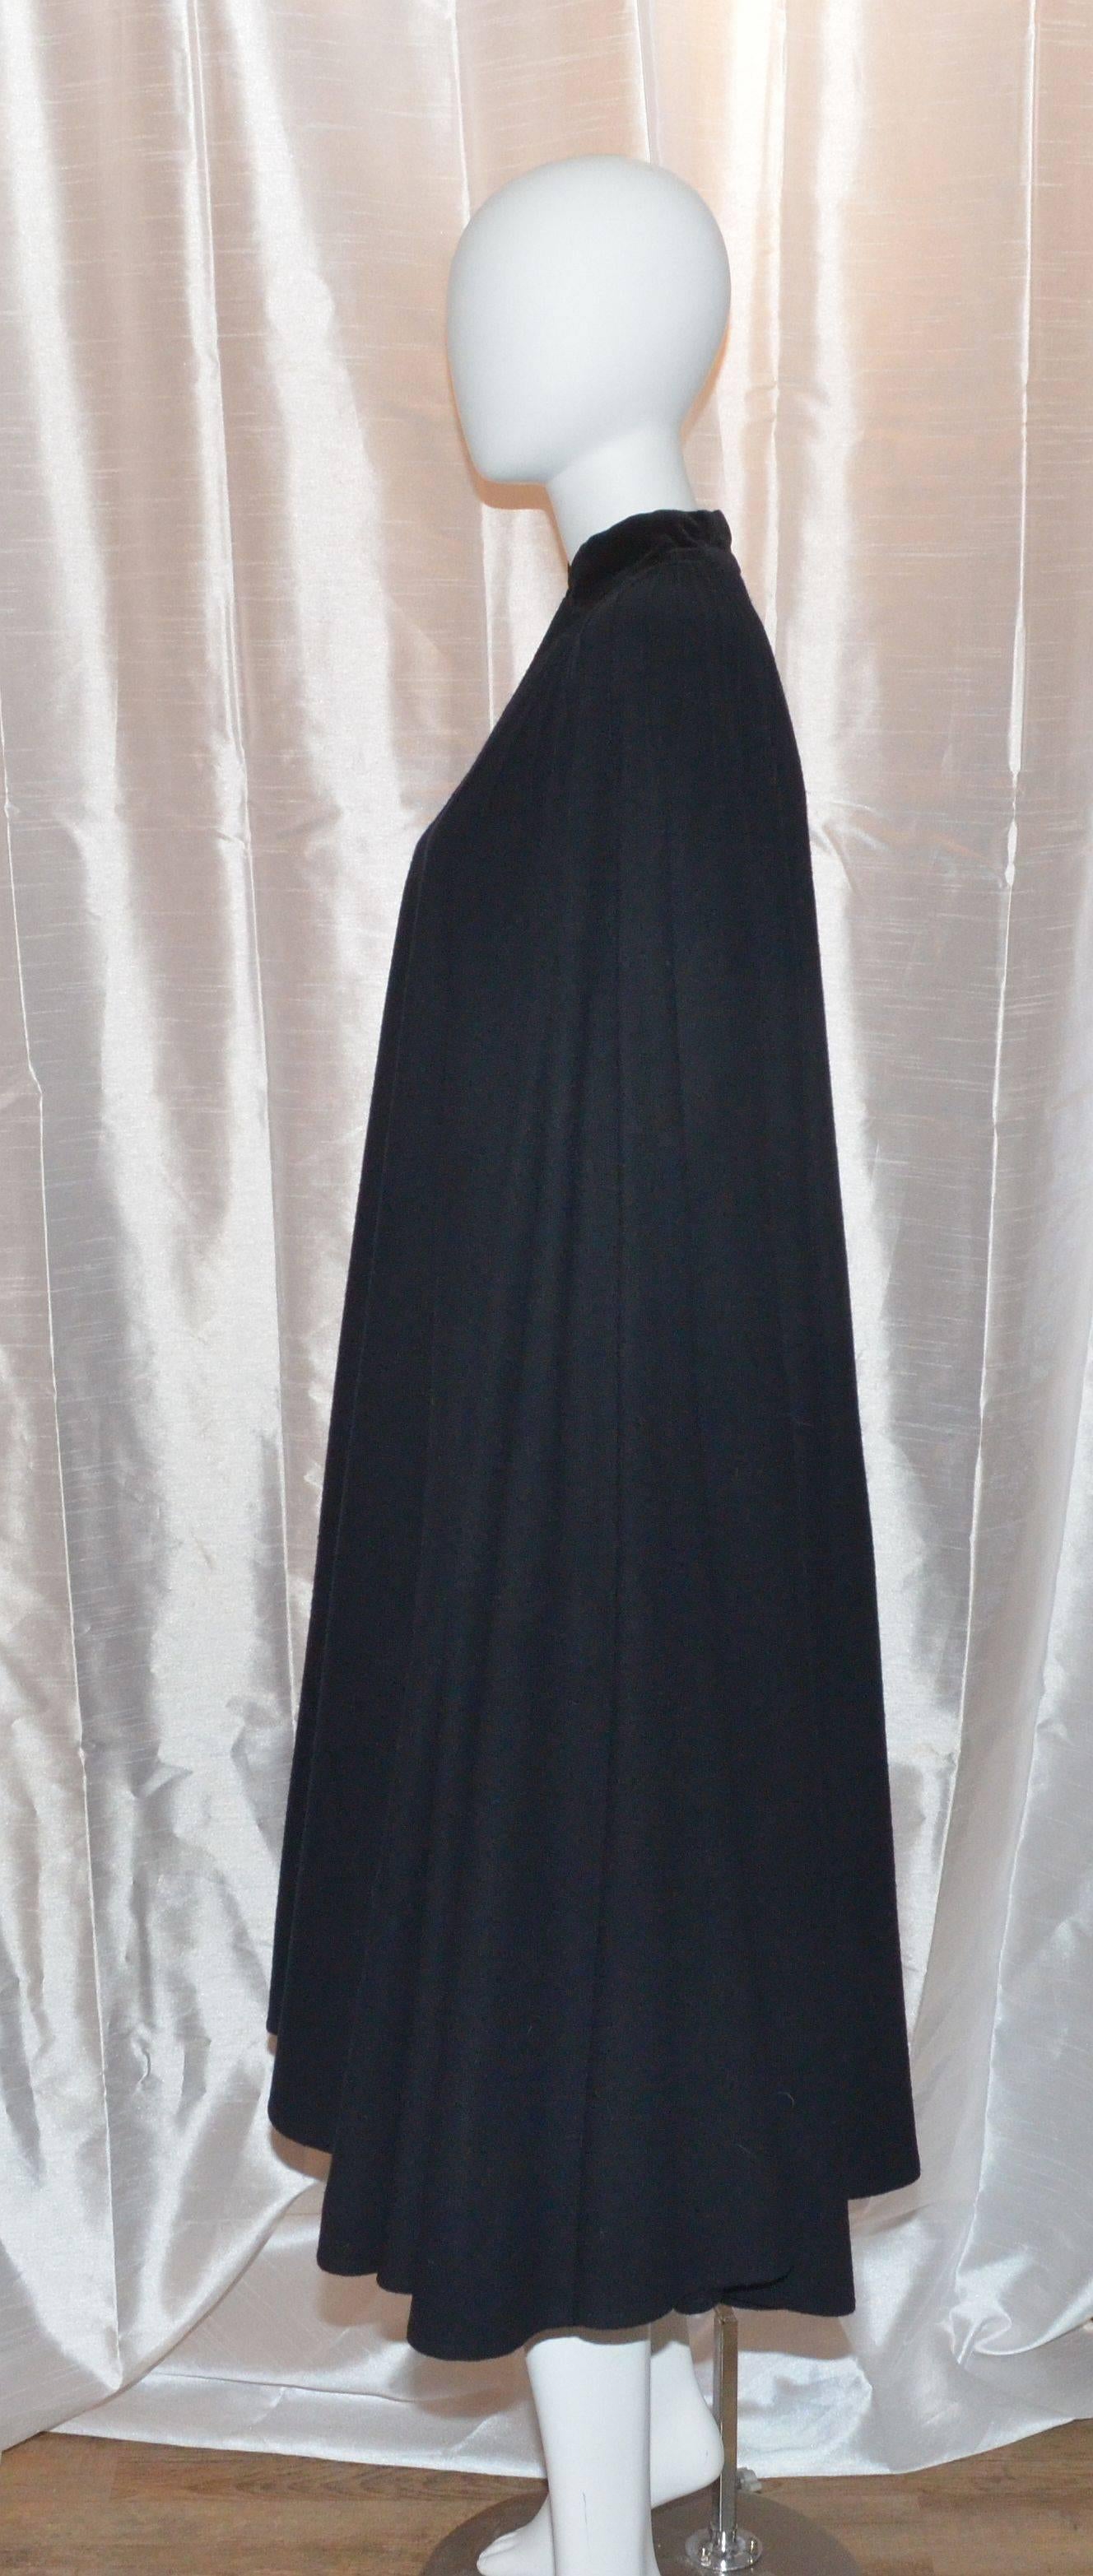 Valentino Vintage Miss V Black Wool Cape & Velvet Nehru Collar Pin Tuck Yoke

Vintage Valentino Miss V Wool Cape features black button closures with rhinestone jewels at the center, and velvet  trimming along the neck collar. Cape is made with 53%